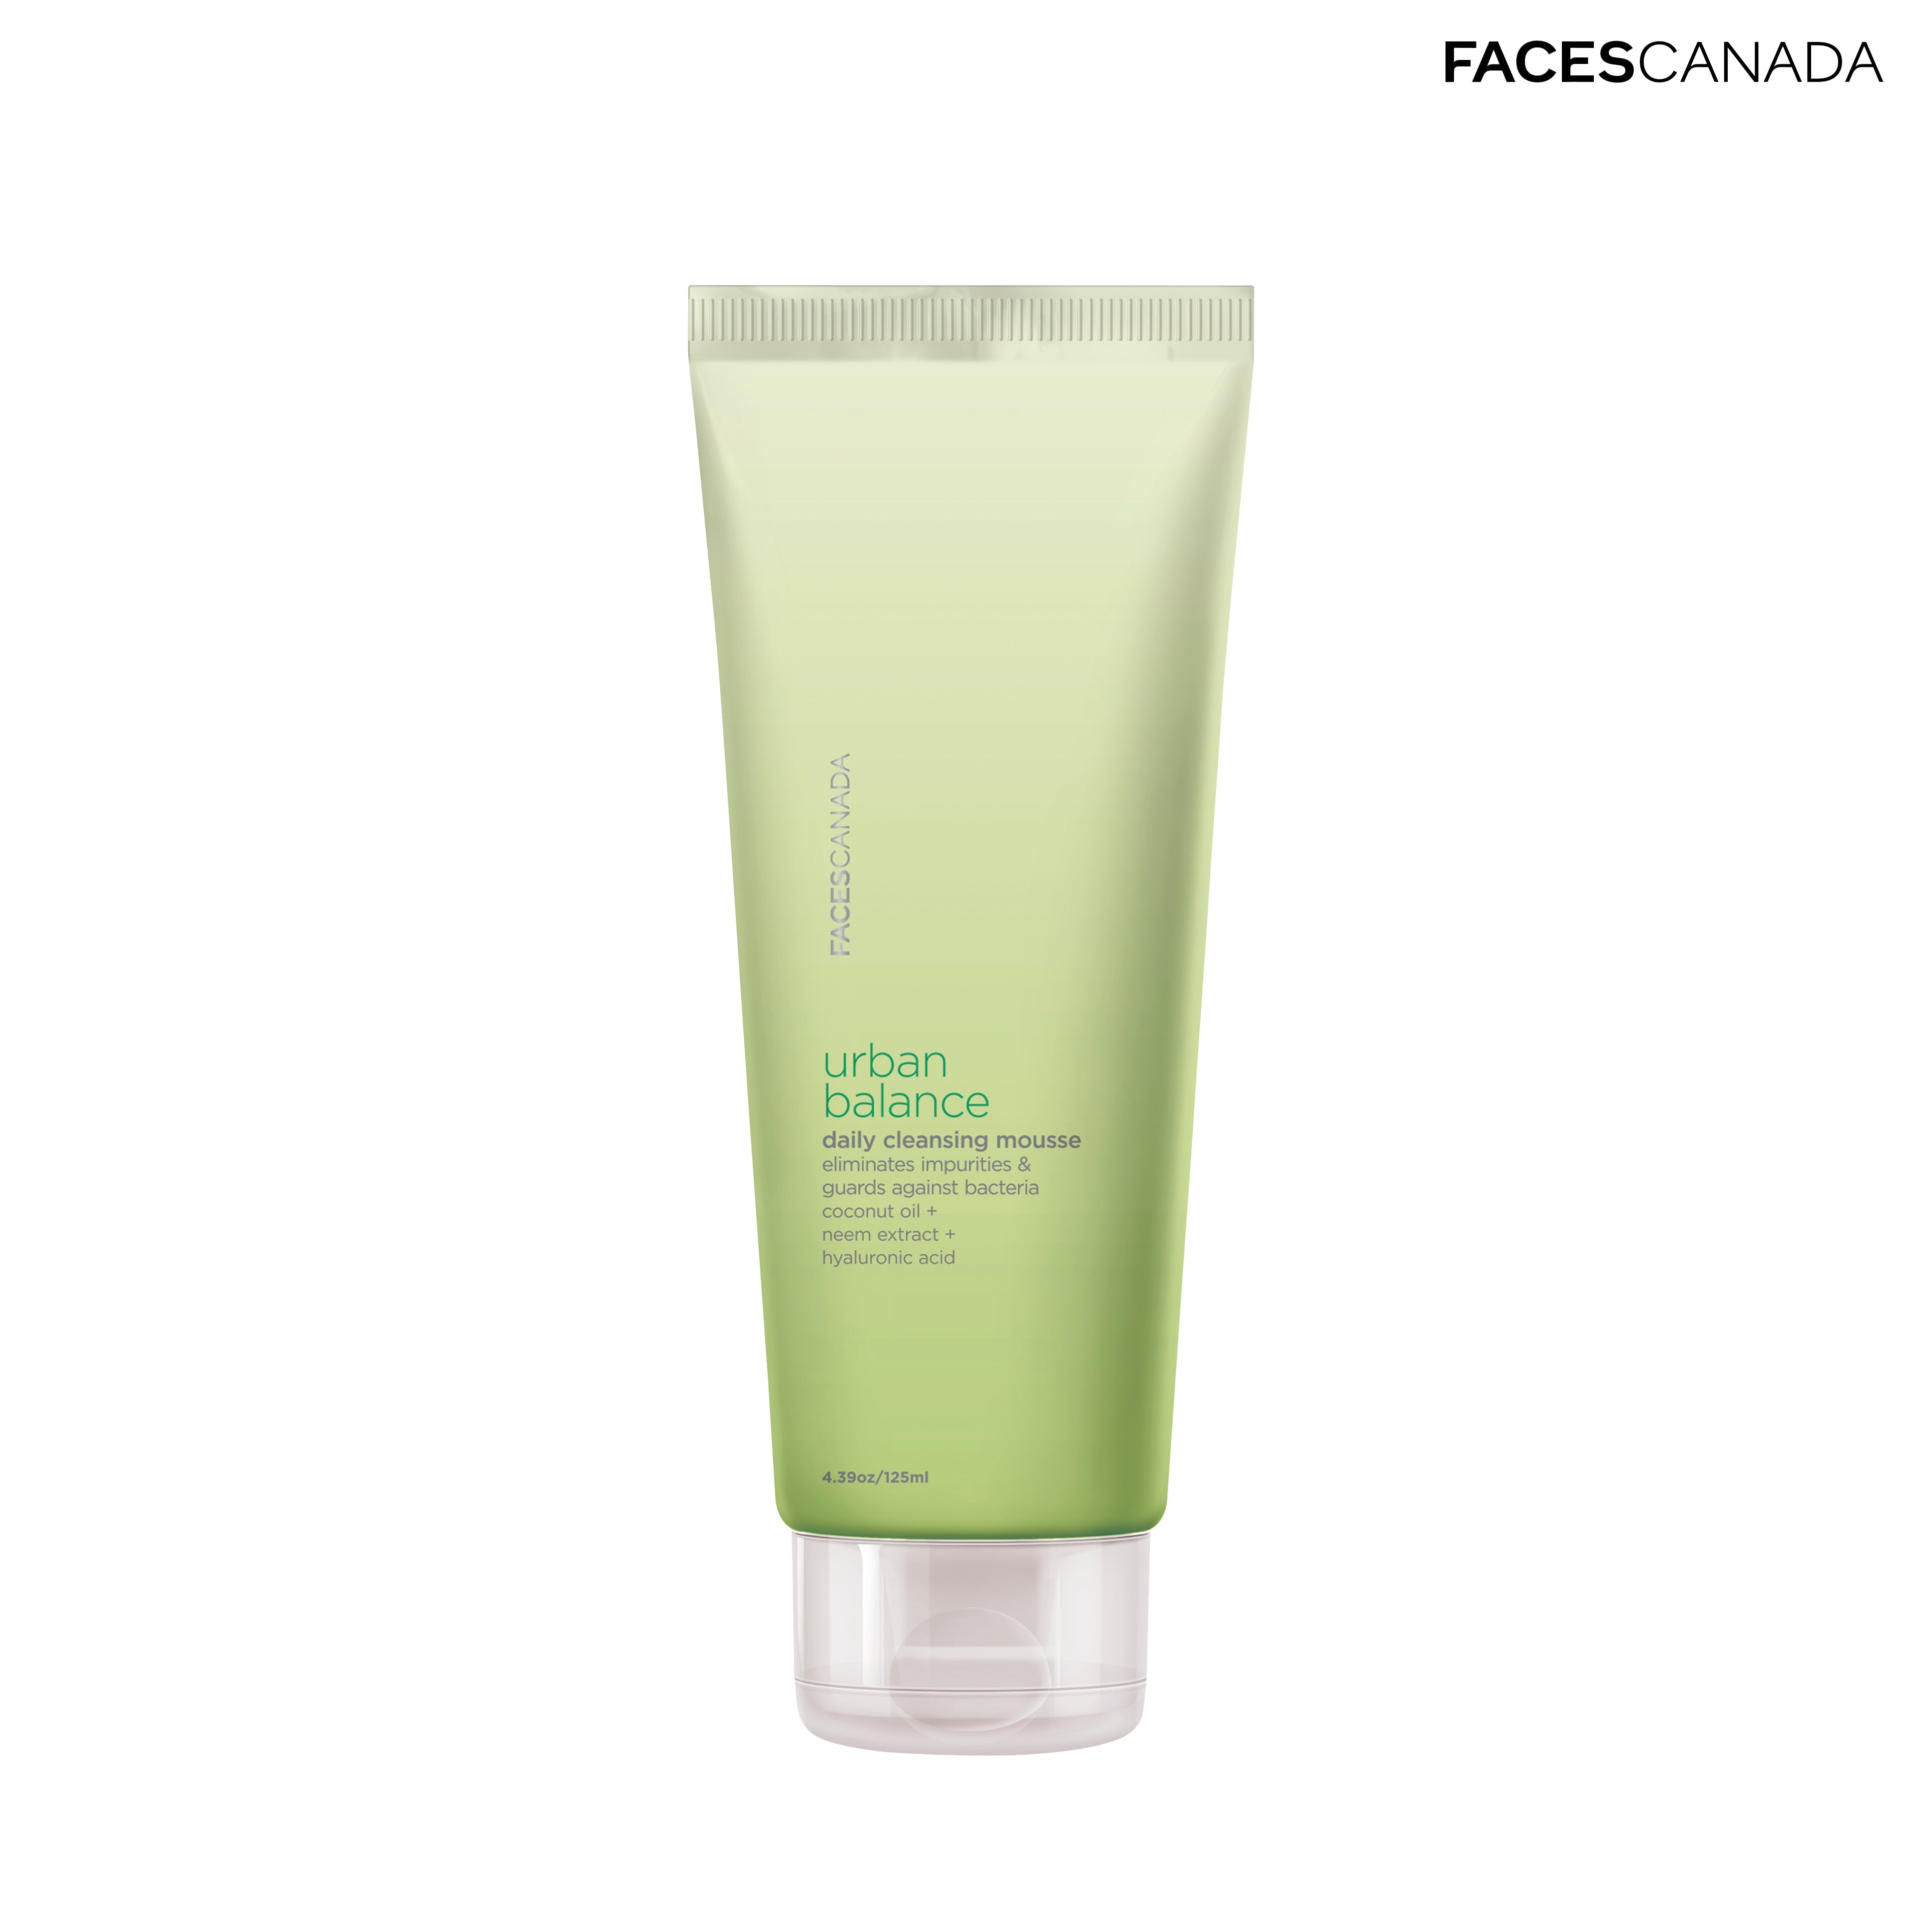 Faces Canada Urban Balance Daily Cleansing Mousse Faces Canada